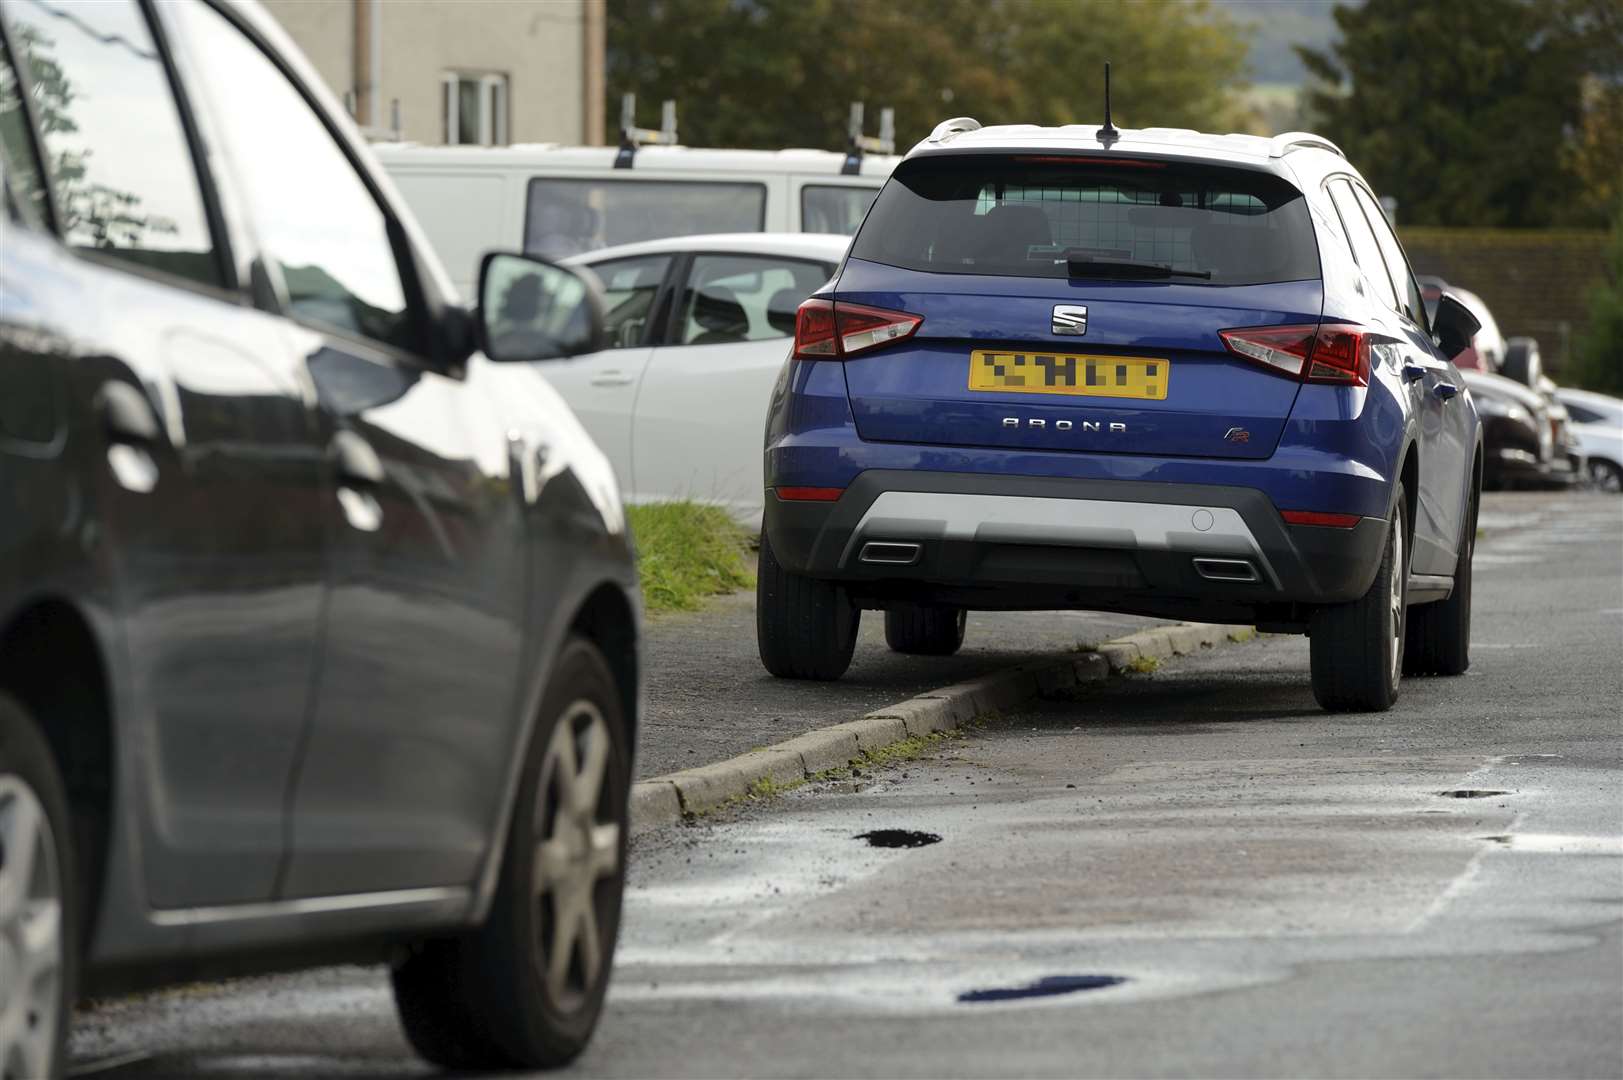 Councils can now impose fine for parking on the pavement. Picture: James MacKenzie